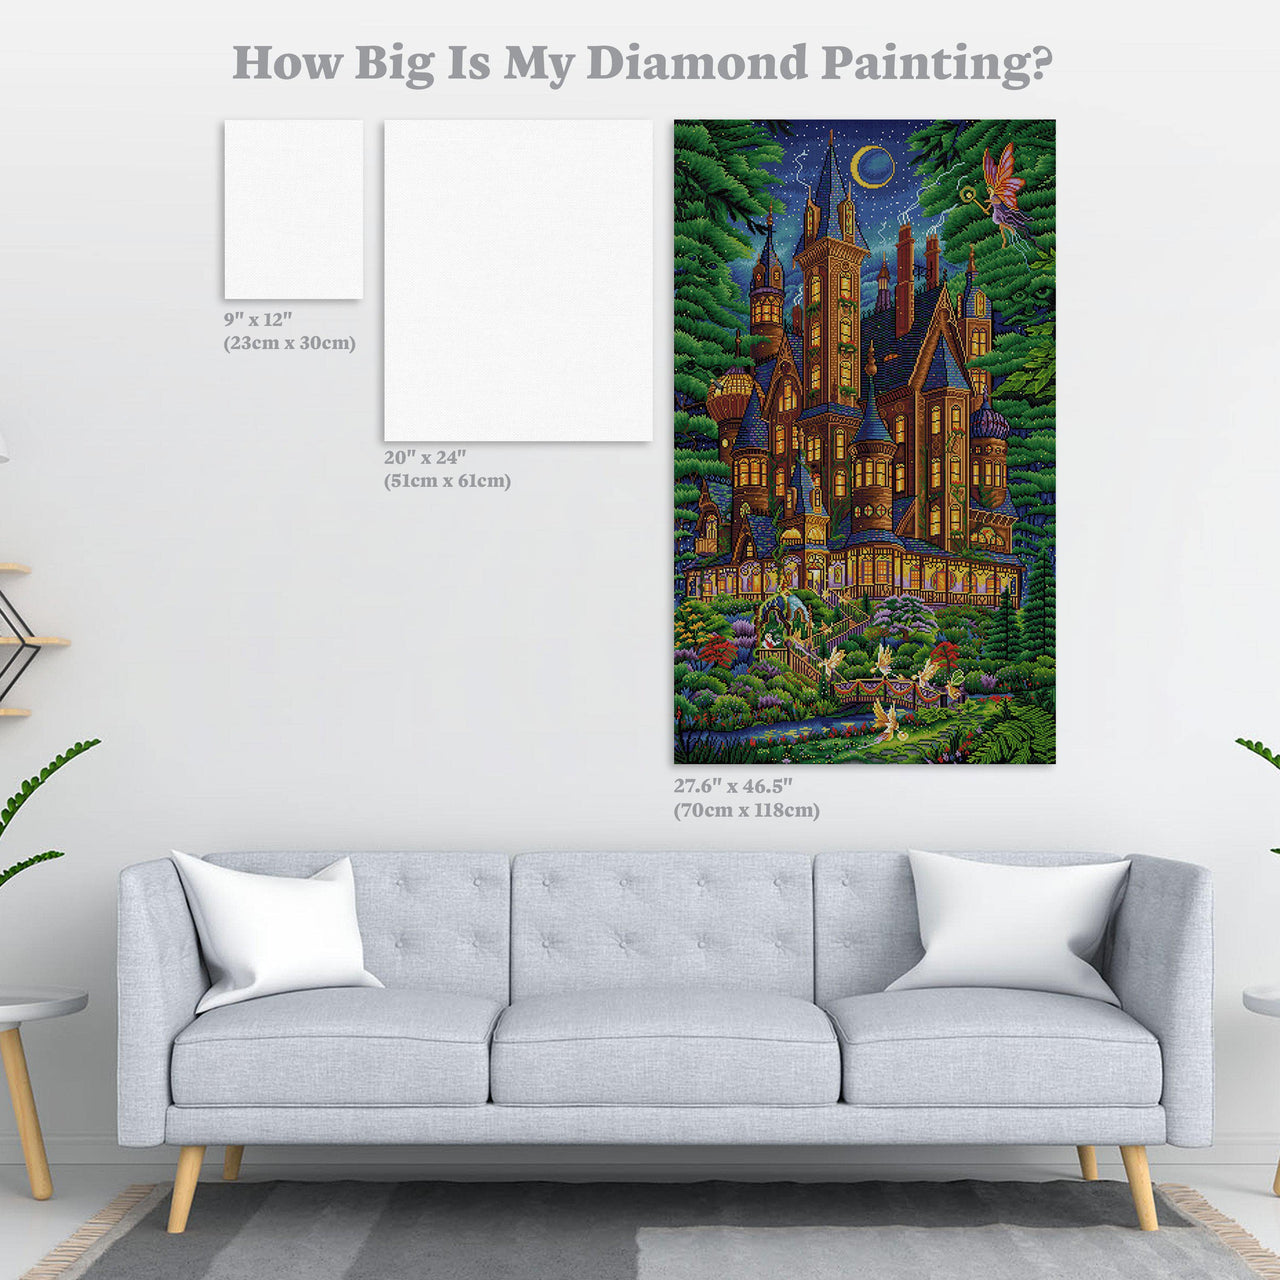 Diamond Painting Some Enchanted Evening 27.6" x 46.5" (70cm x 118cm) / Square with 51 Colors including 5 ABs / 129,636